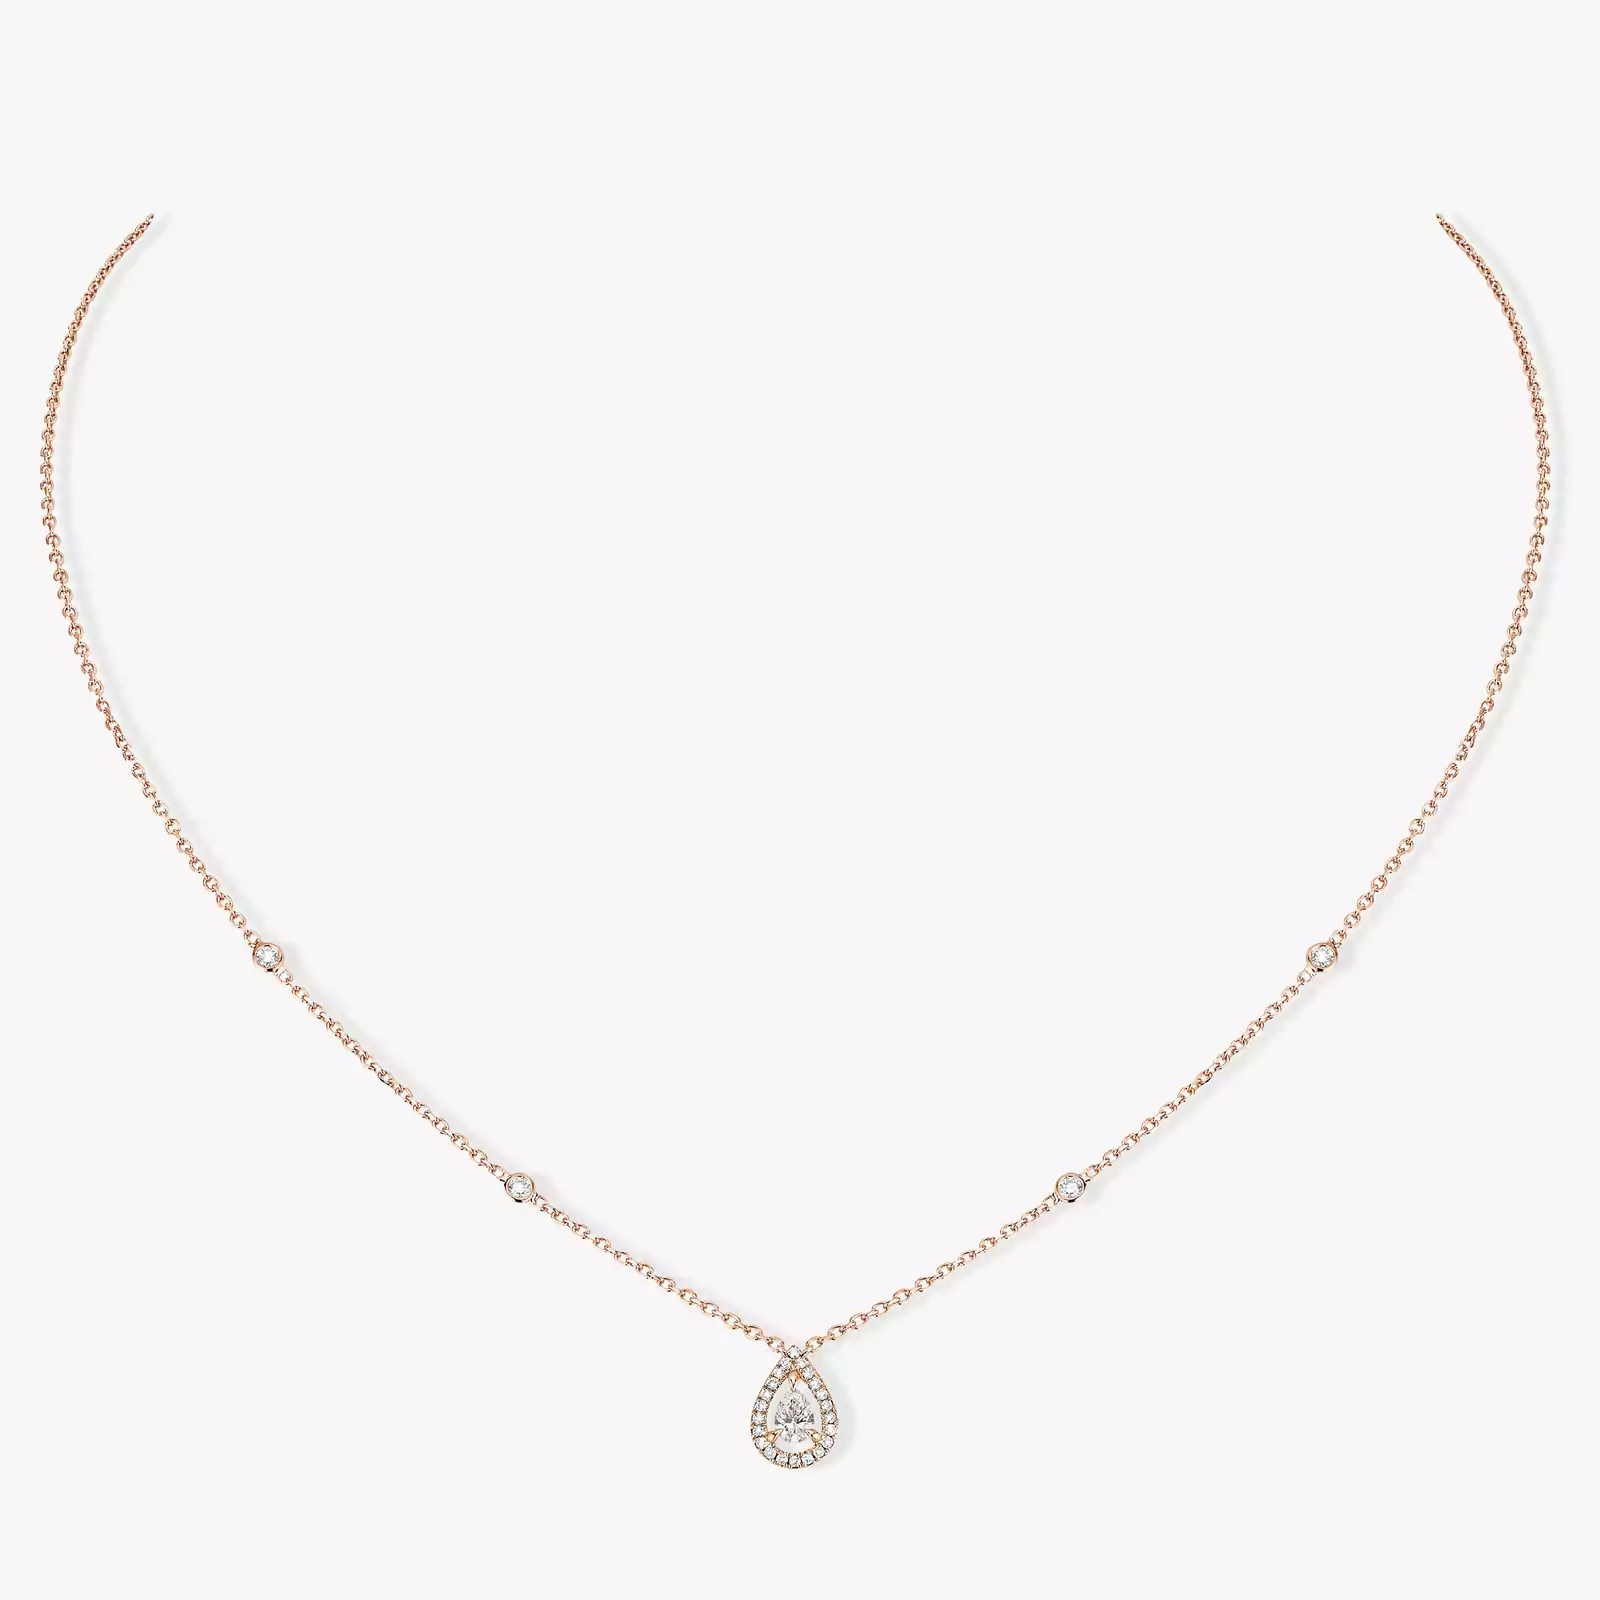 Necklace For Her Pink Gold Diamond Joy Pear Diamond 0.25ct 05224-PG